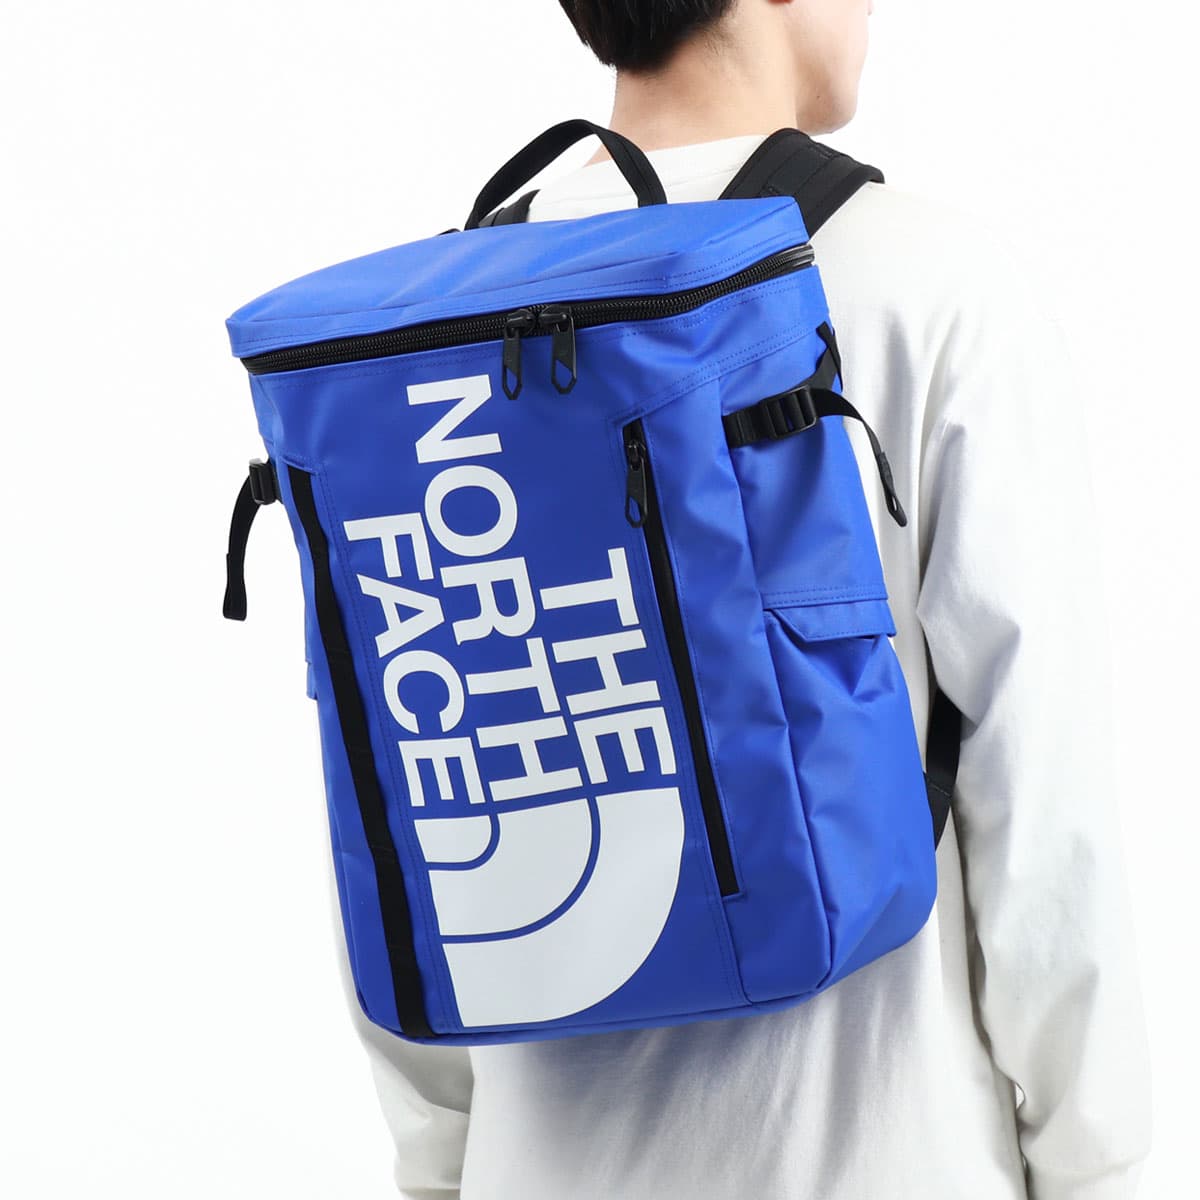 THE NORTH FACE ヒューズボックス サミットゴールド　NM82255